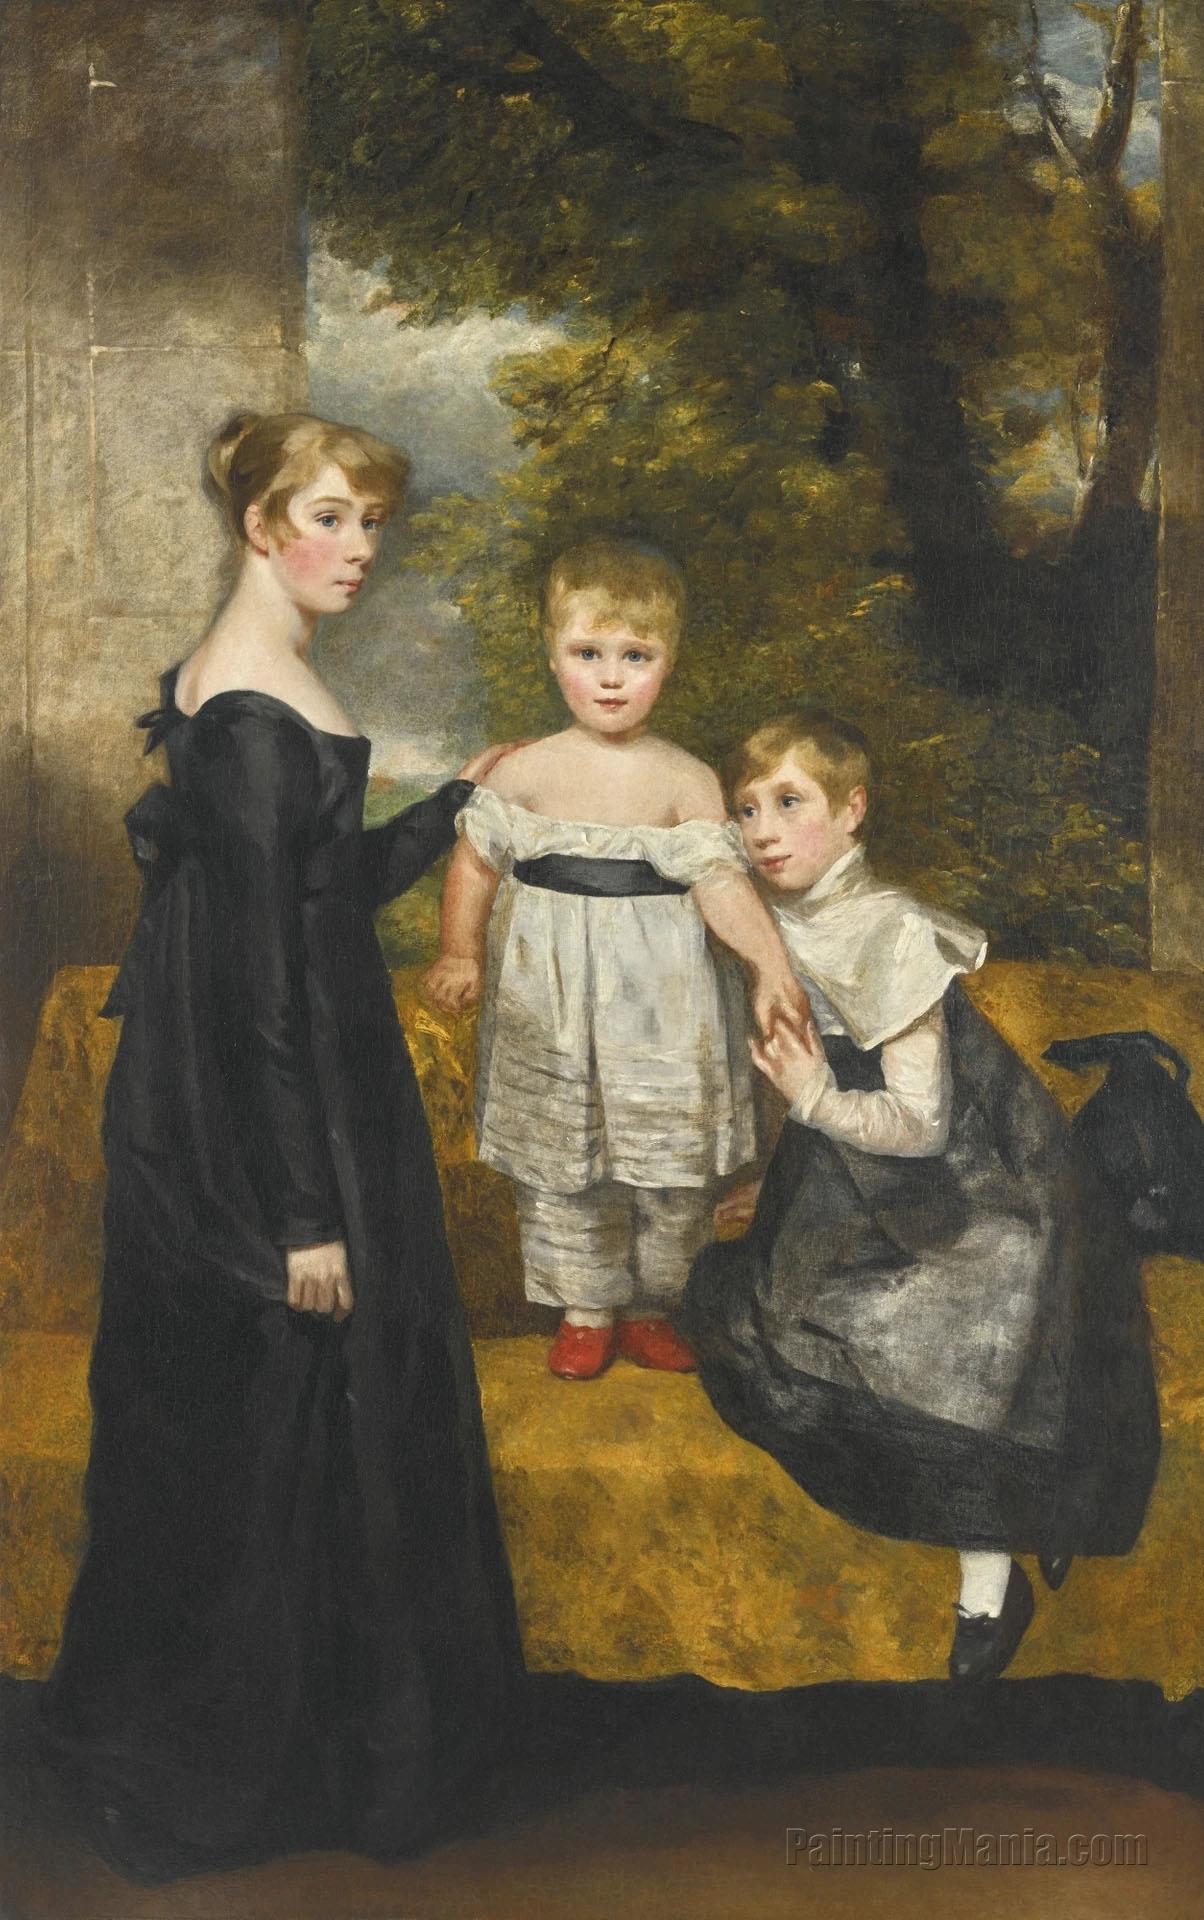 A Group Portrait of the Barker Children in a Landscape